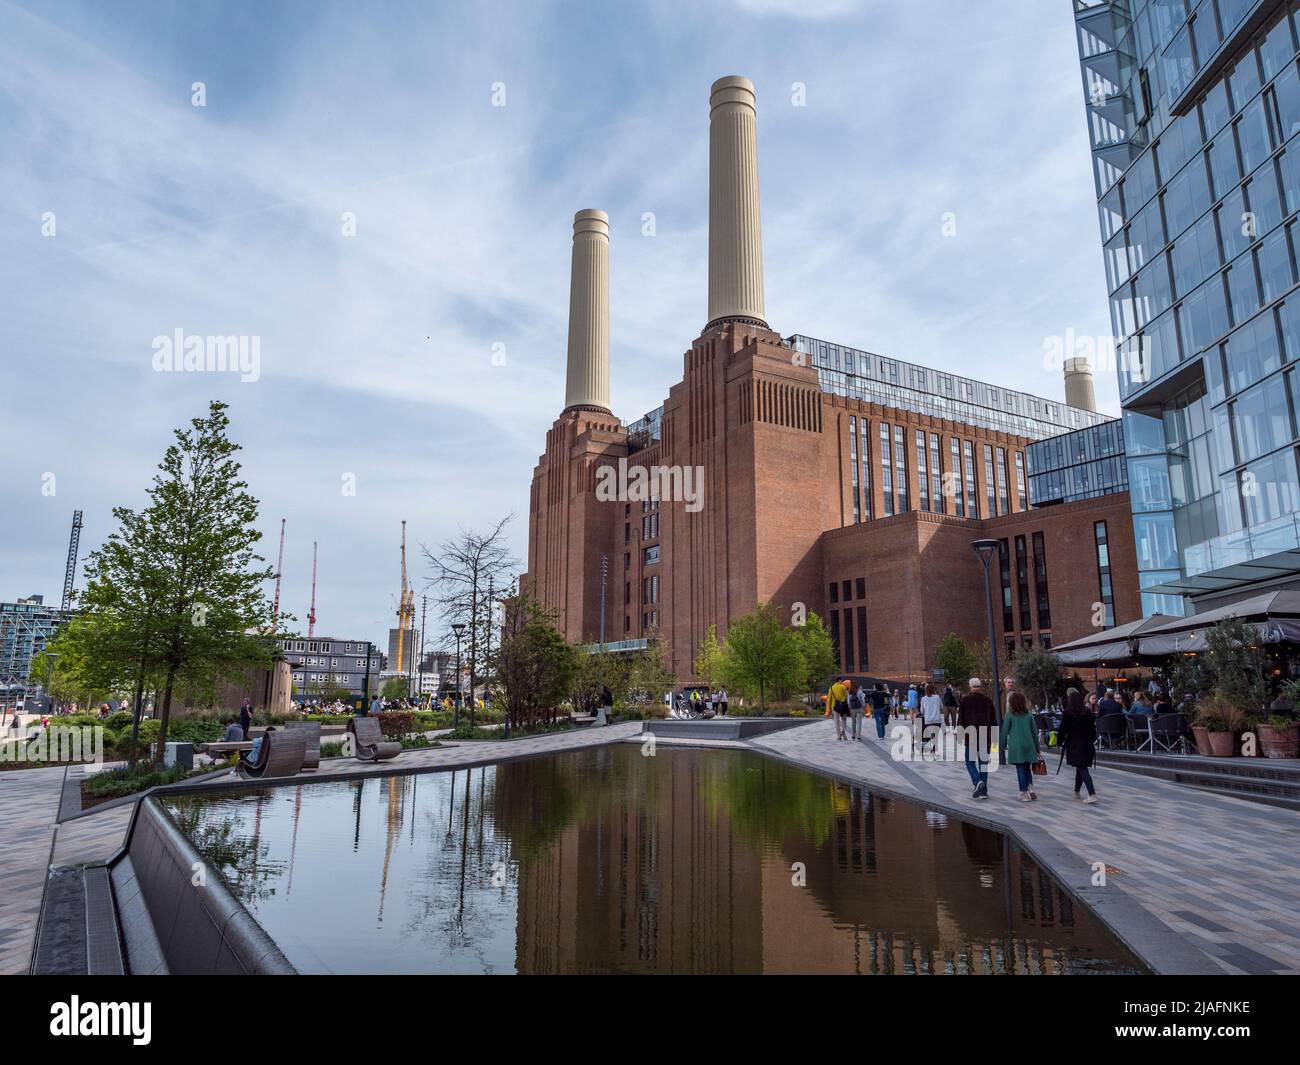 General view of part of the regenerated Battersea Power Station site in  Battersea, Wandsworth, South London, UK. Stock Photo